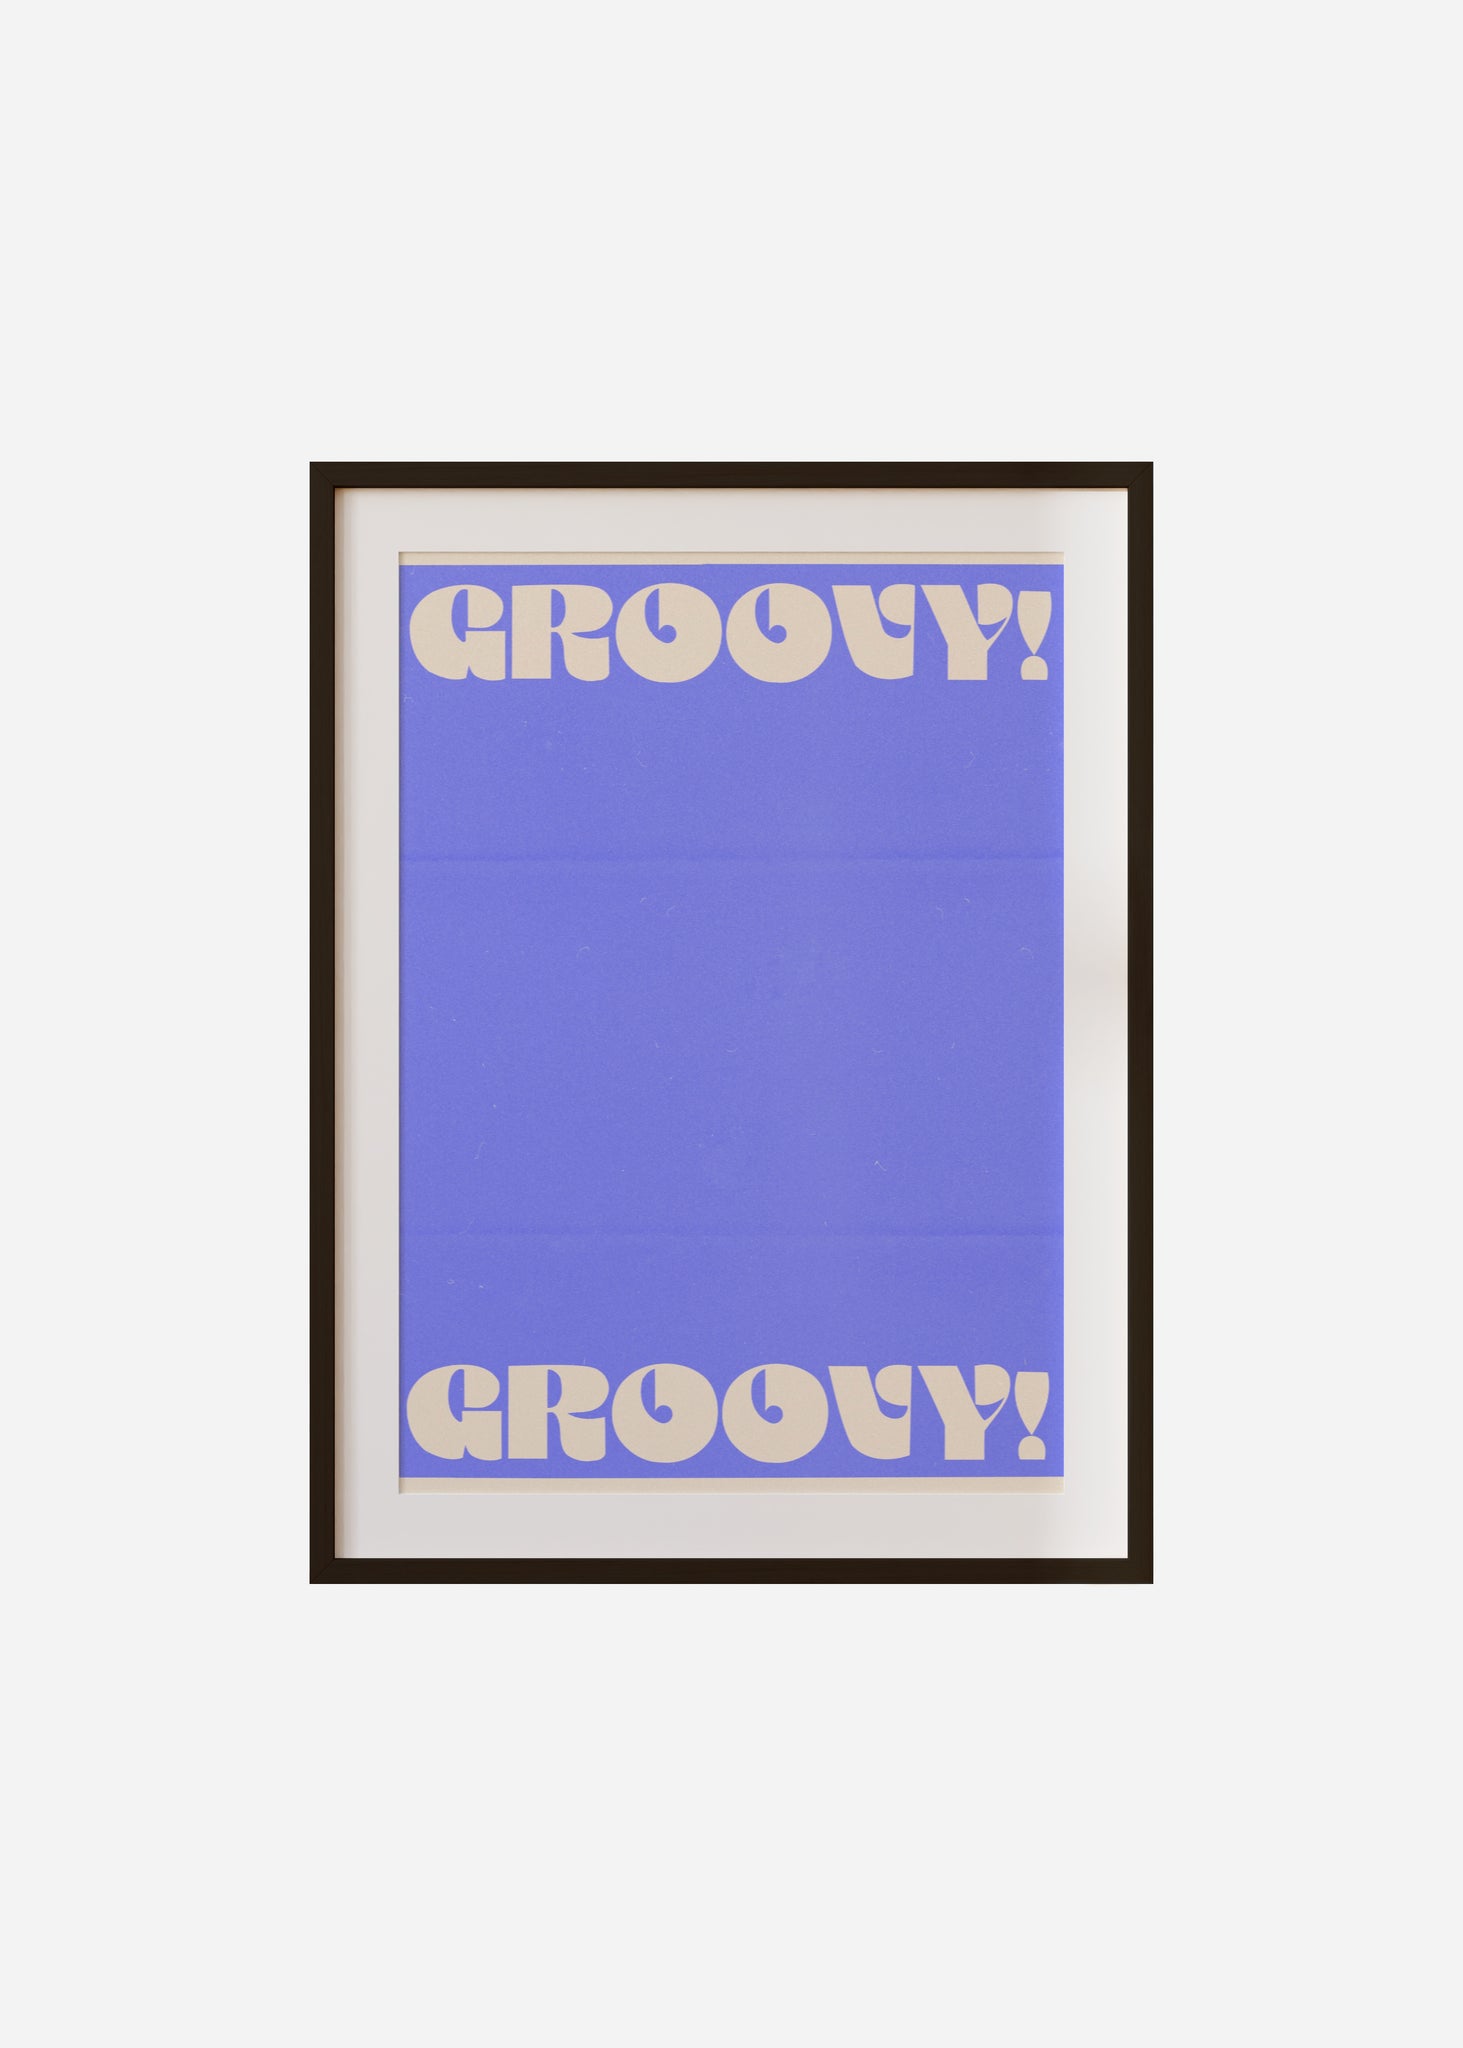 groovy! Framed & Mounted Print